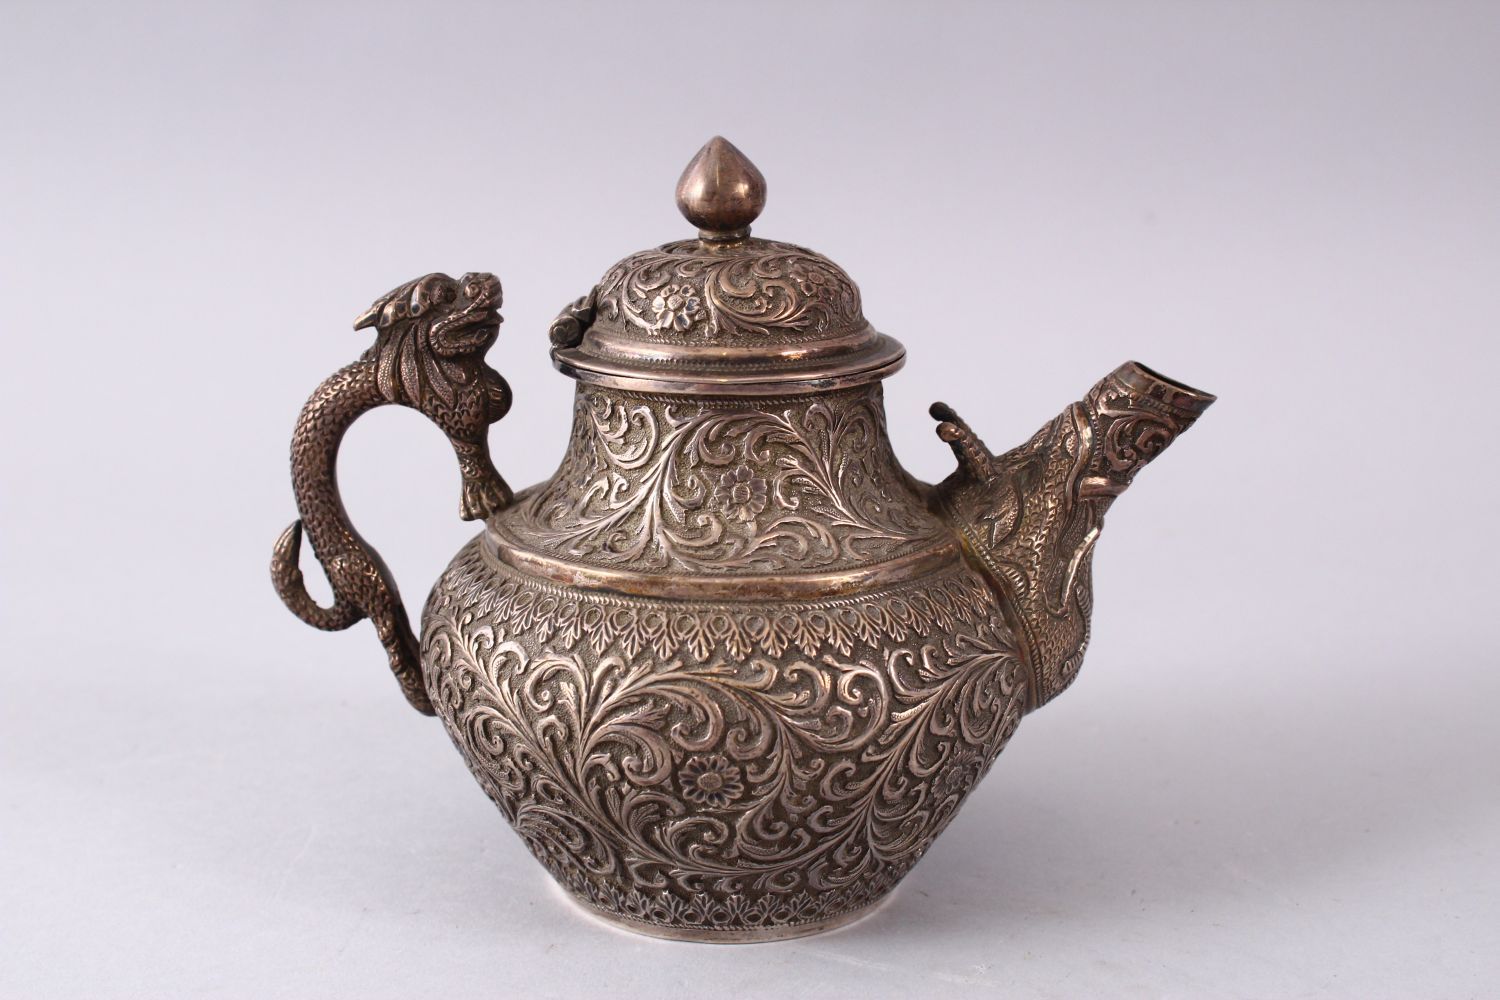 A GOOD 19TH CENTURY TURKISH SOLID SILVER TEAPOT carved with formal foliage and a dog style handle, - Image 3 of 10